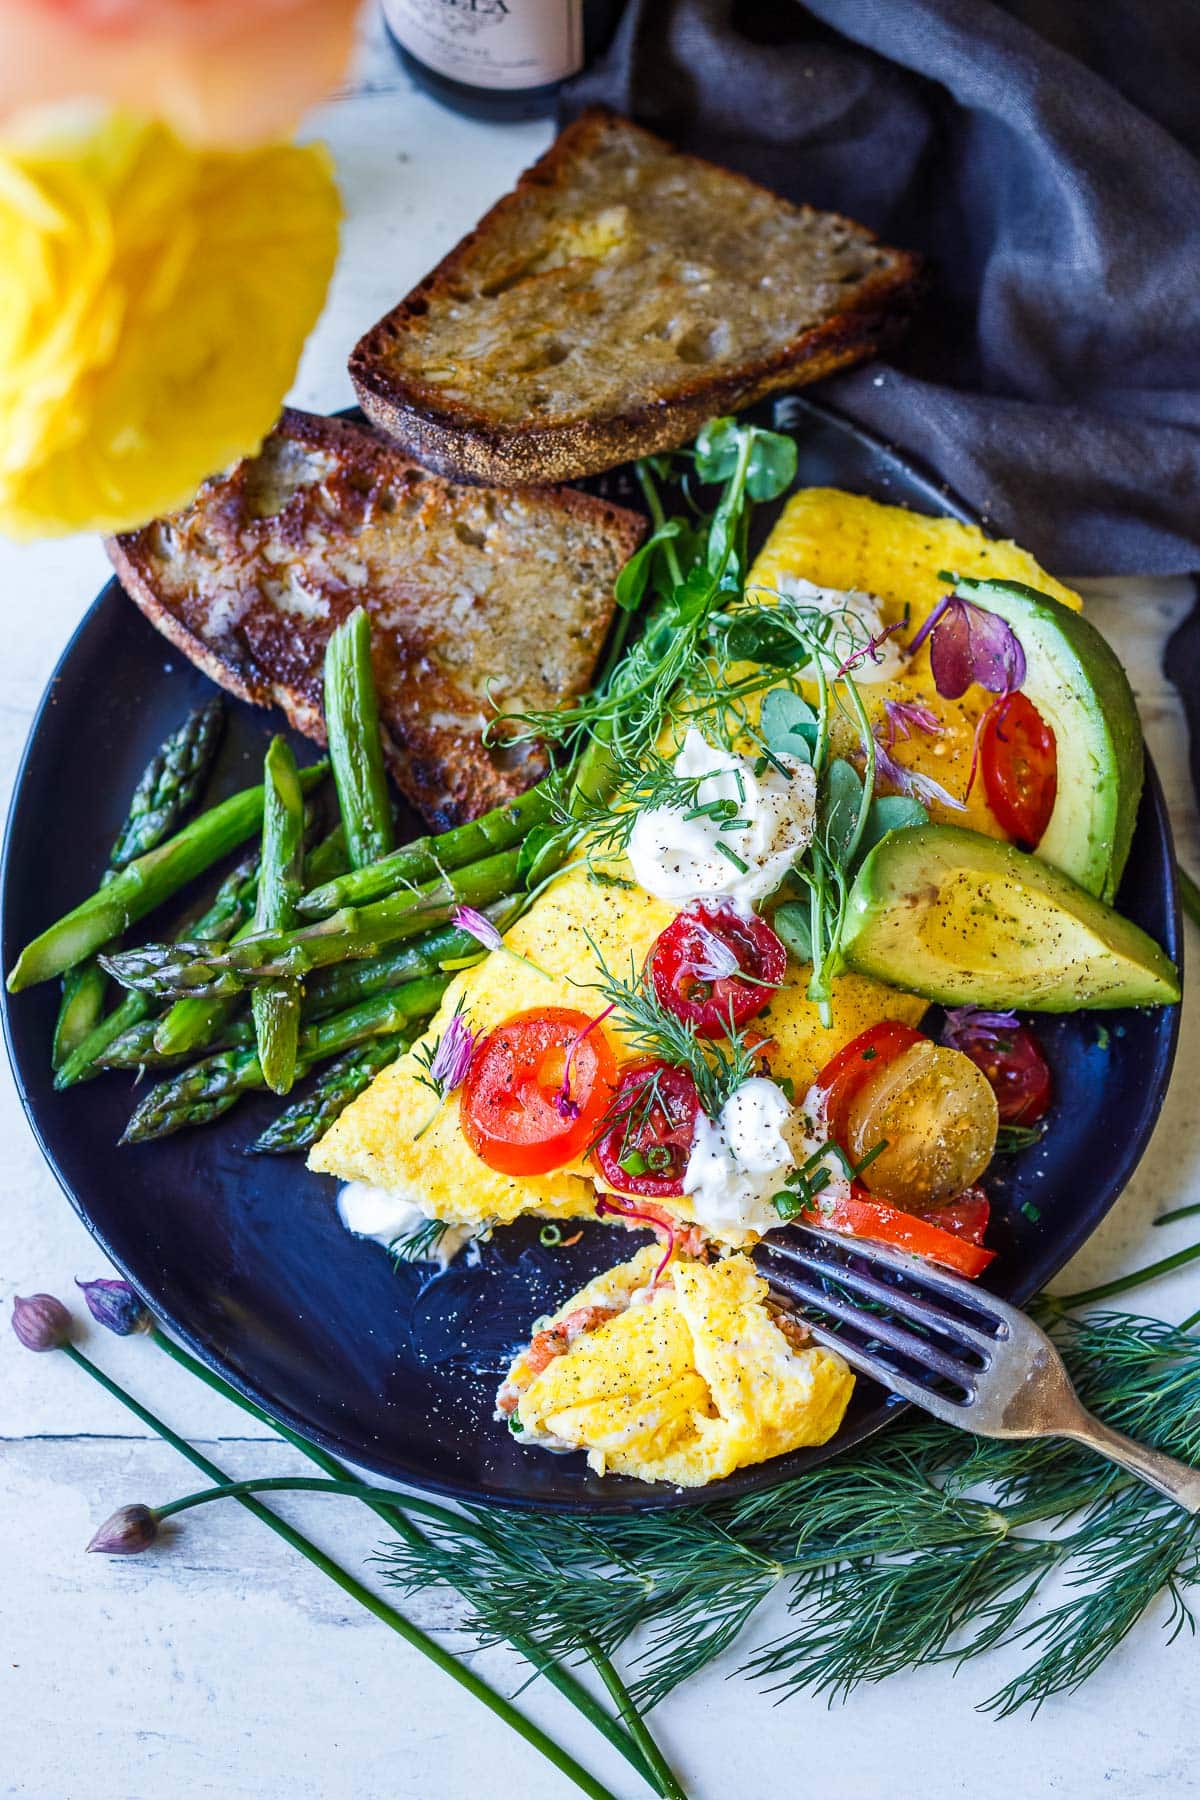 champagne omelette with cherry tomatoes, avocado, micro greens, and creme fresh on top, served on plate with asparagus and toast.